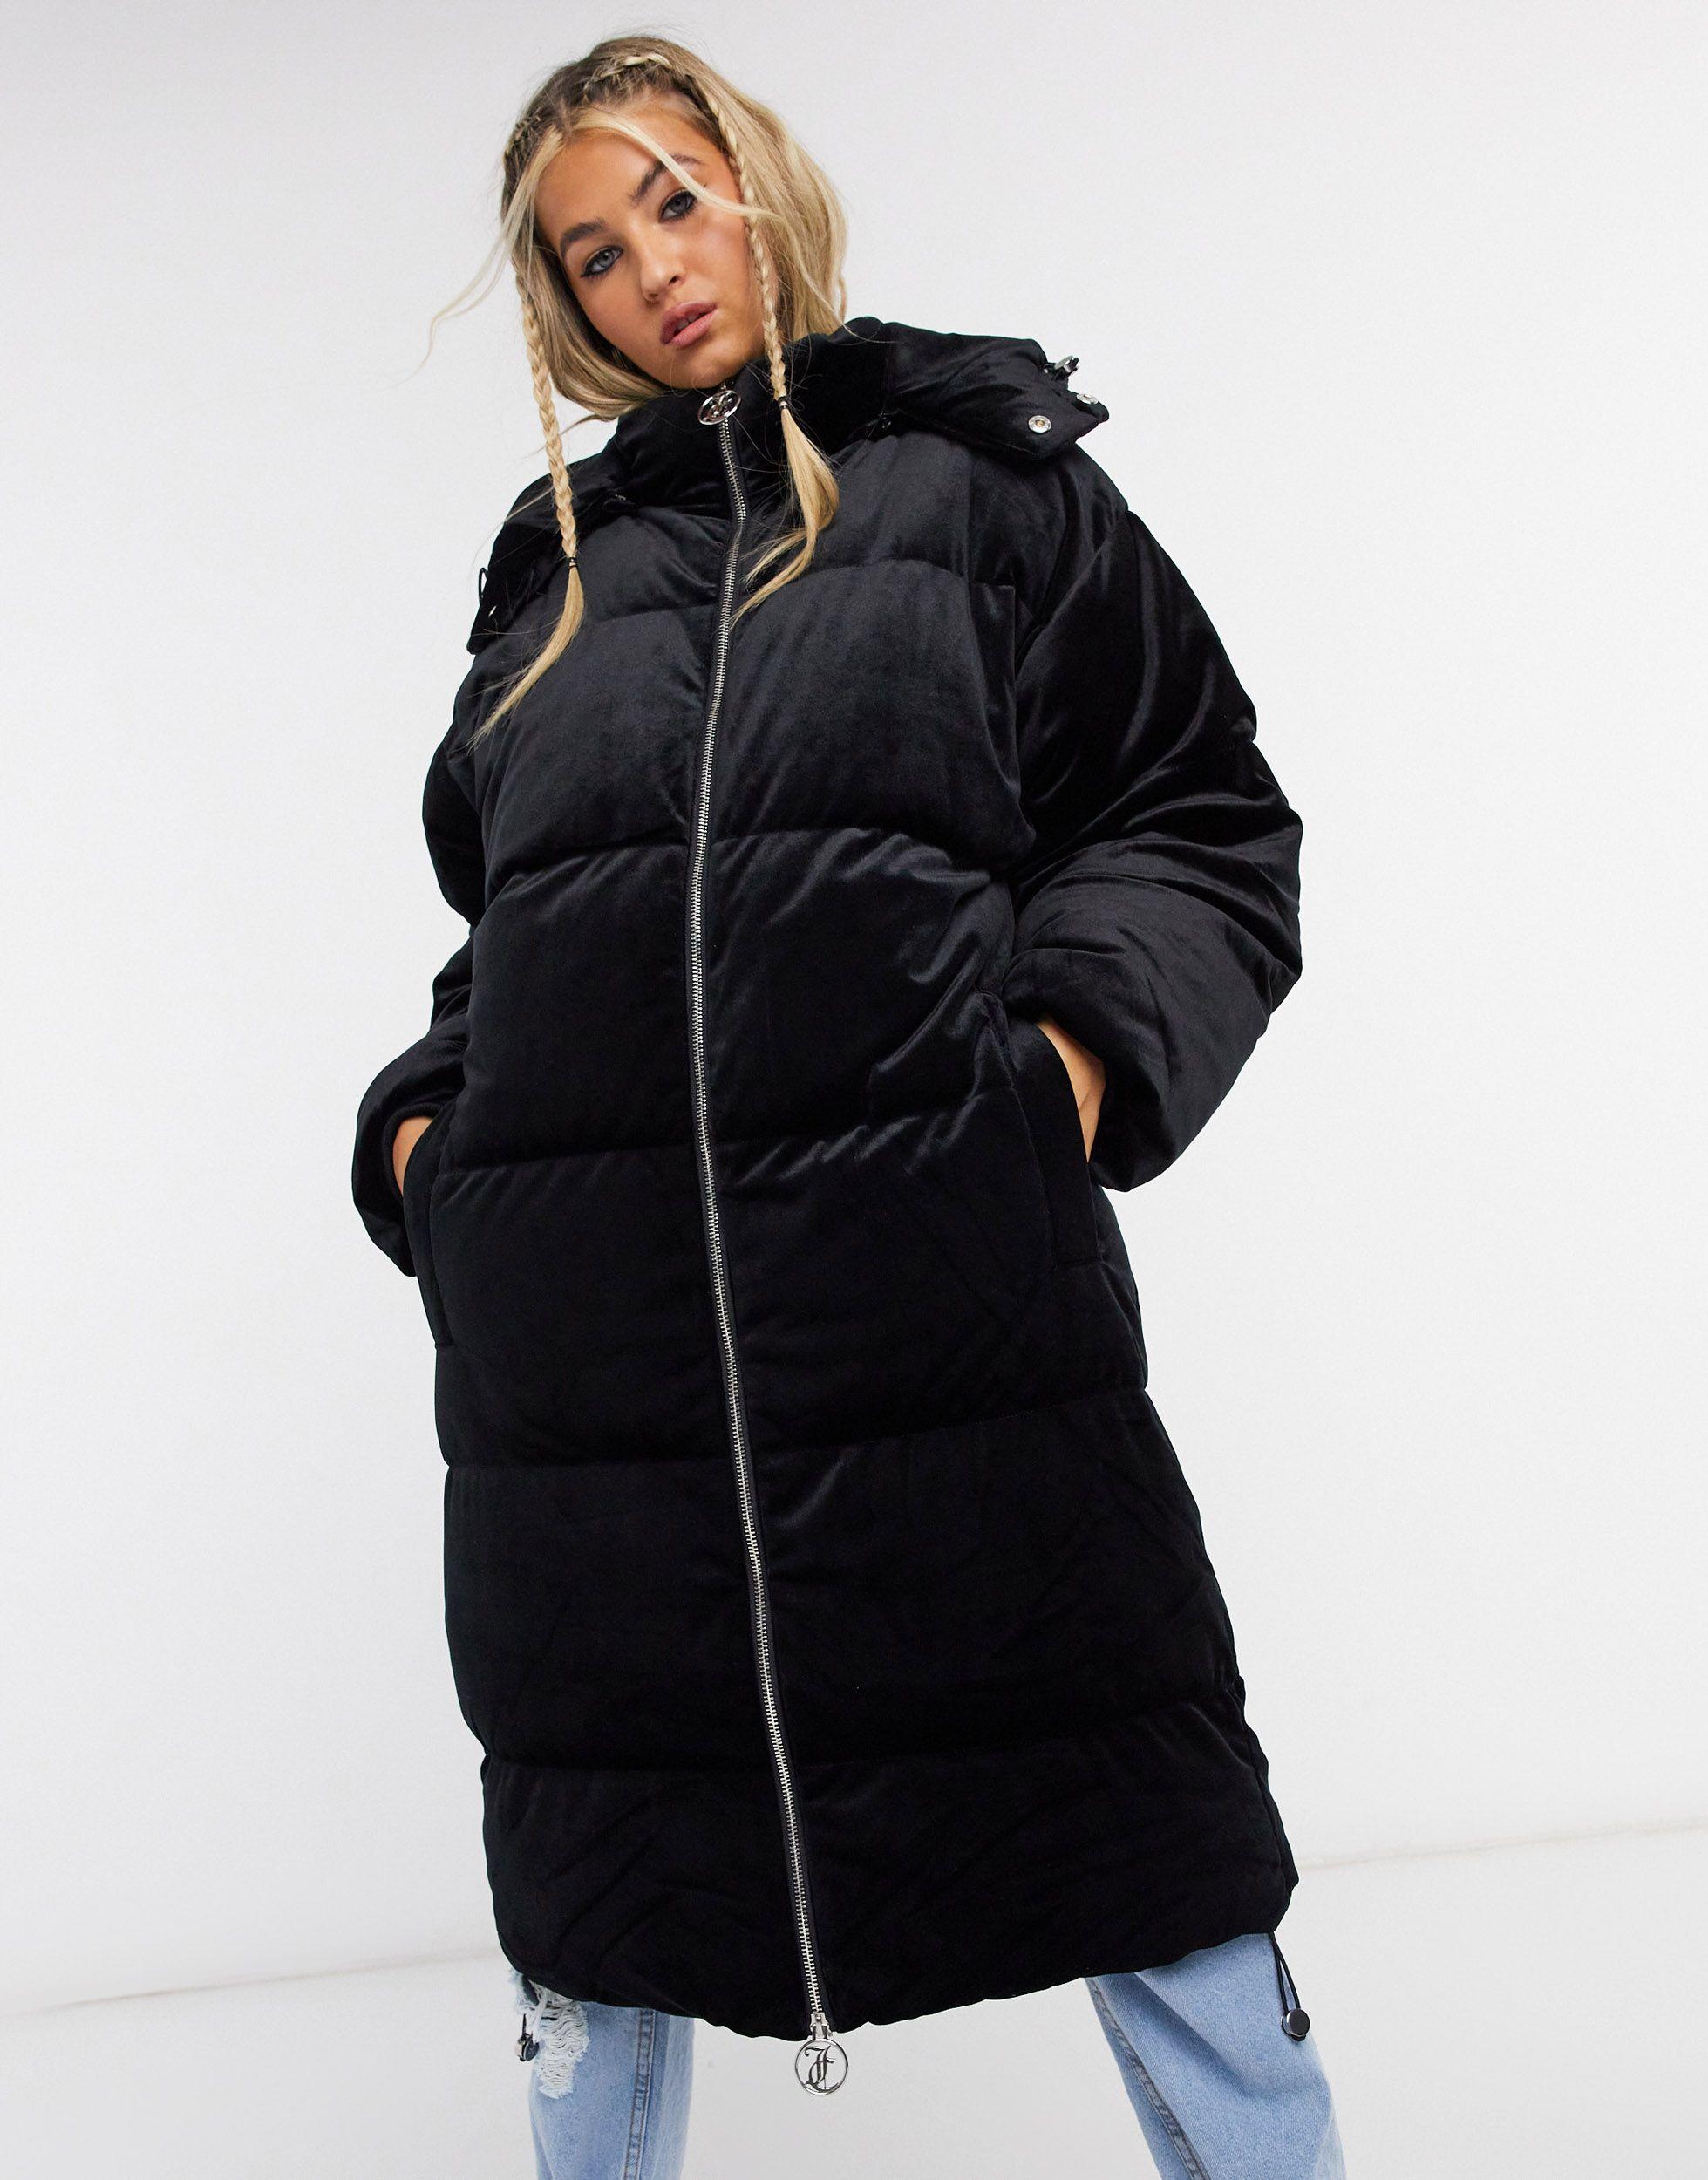 Juicy Couture Helena Puffer Coat in Black | Lyst Canada